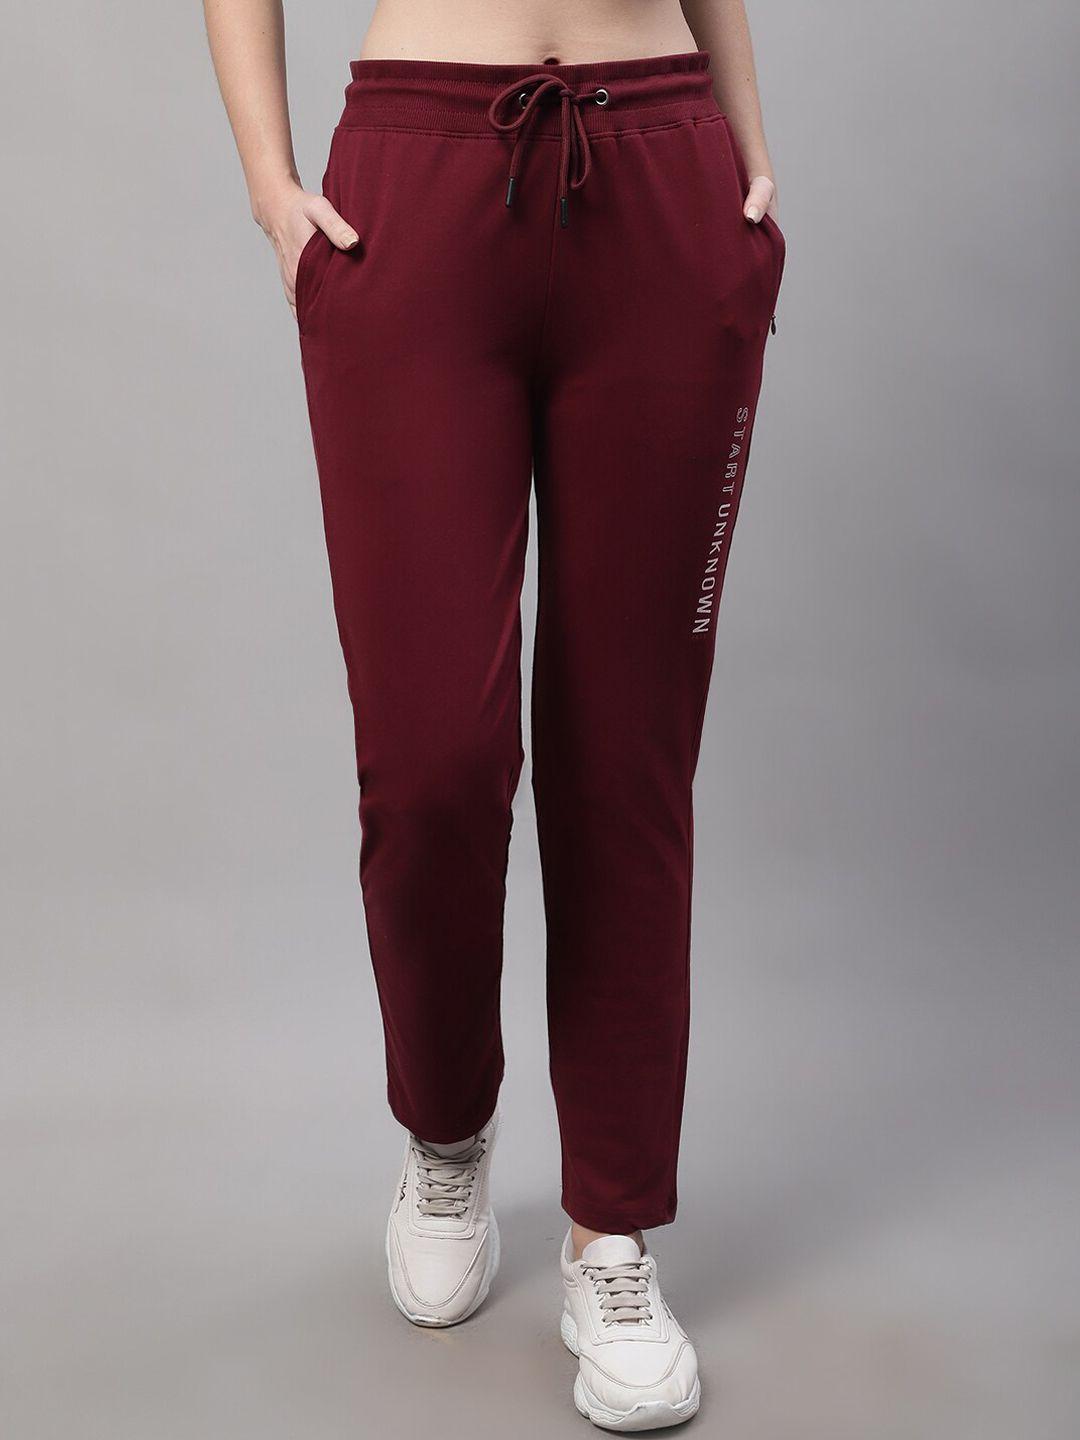 cantabil women printed cotton track pant